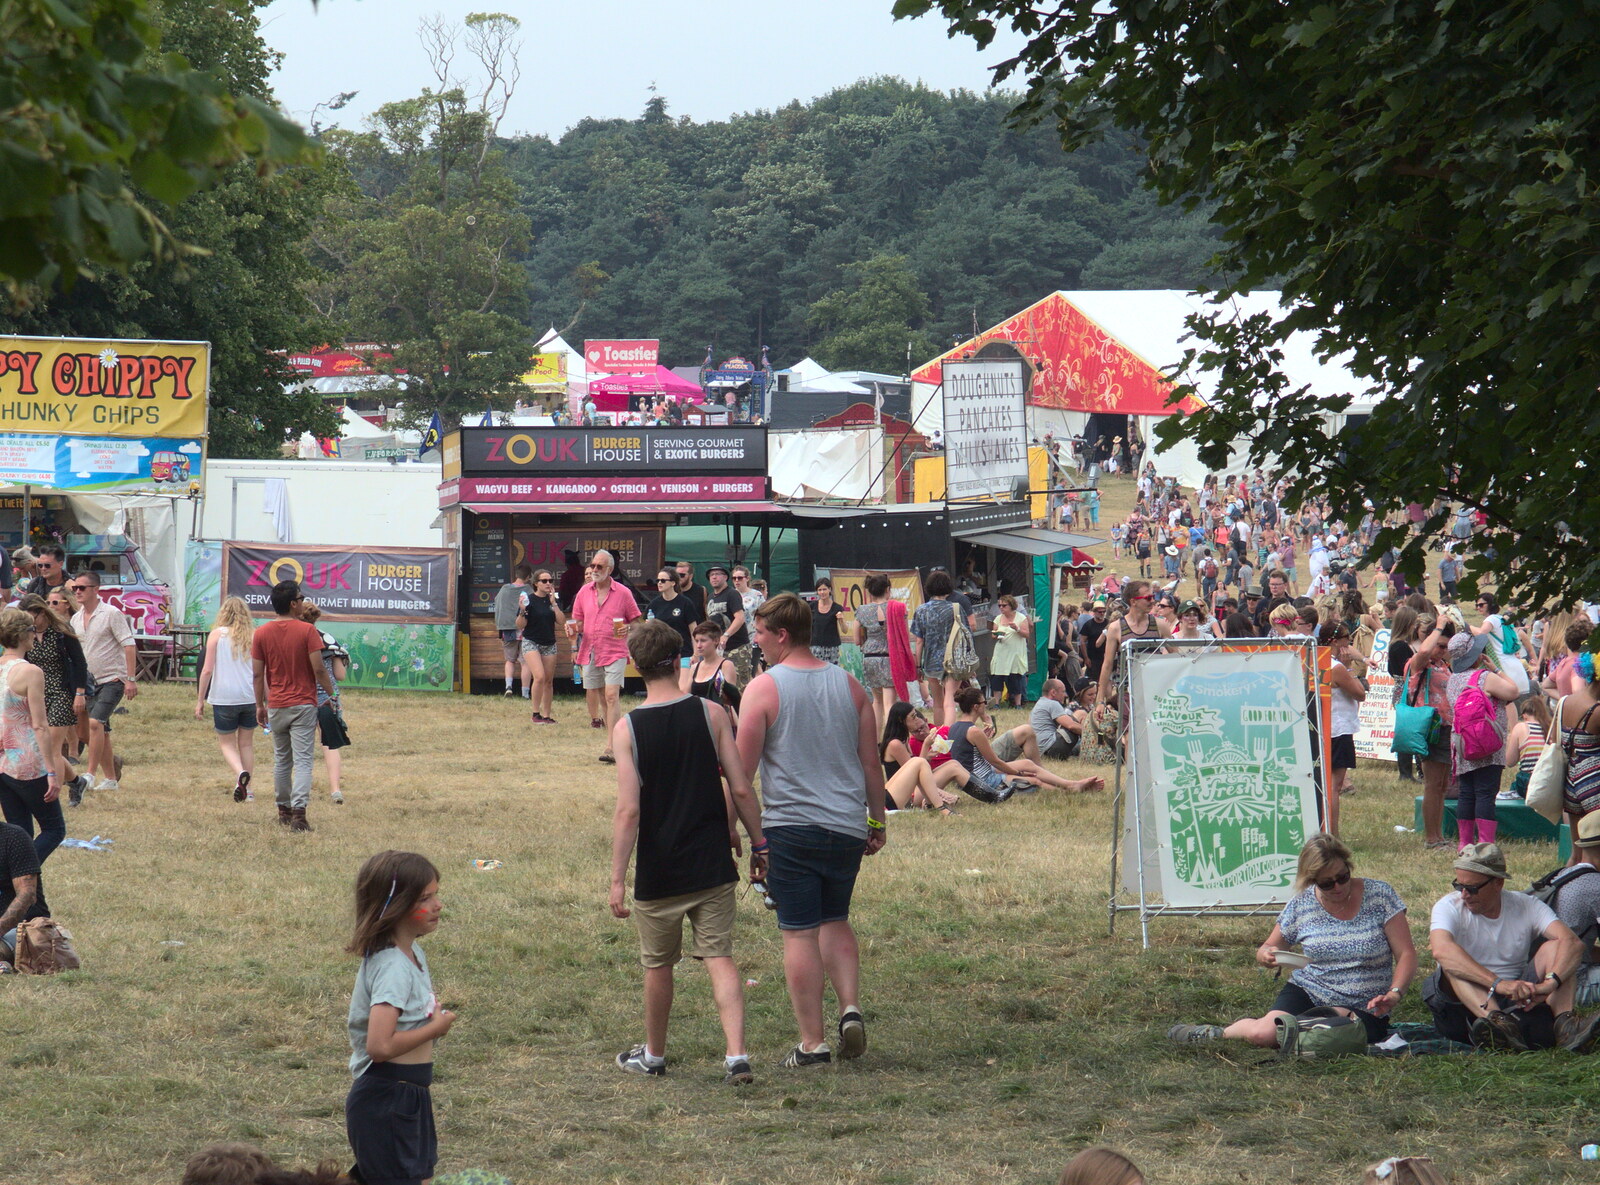 Another festival view from Latitude Festival, Henham Park, Southwold, Suffolk - 17th July 2014